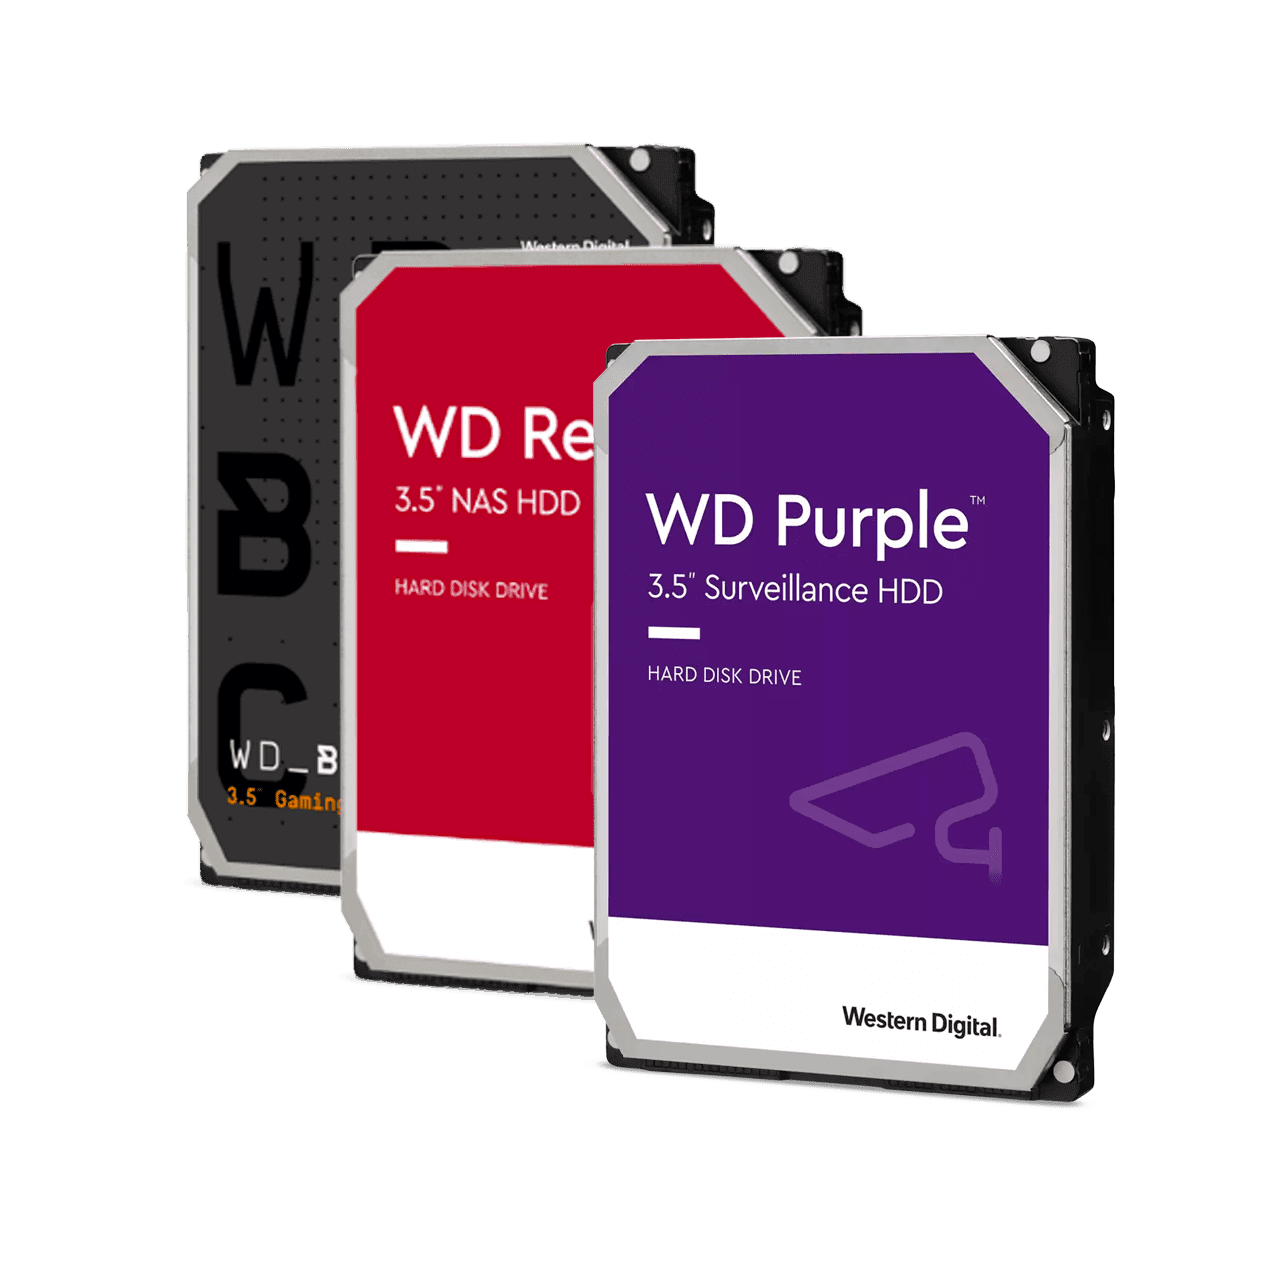 Product Portfolio and Resource Library | Western Digital